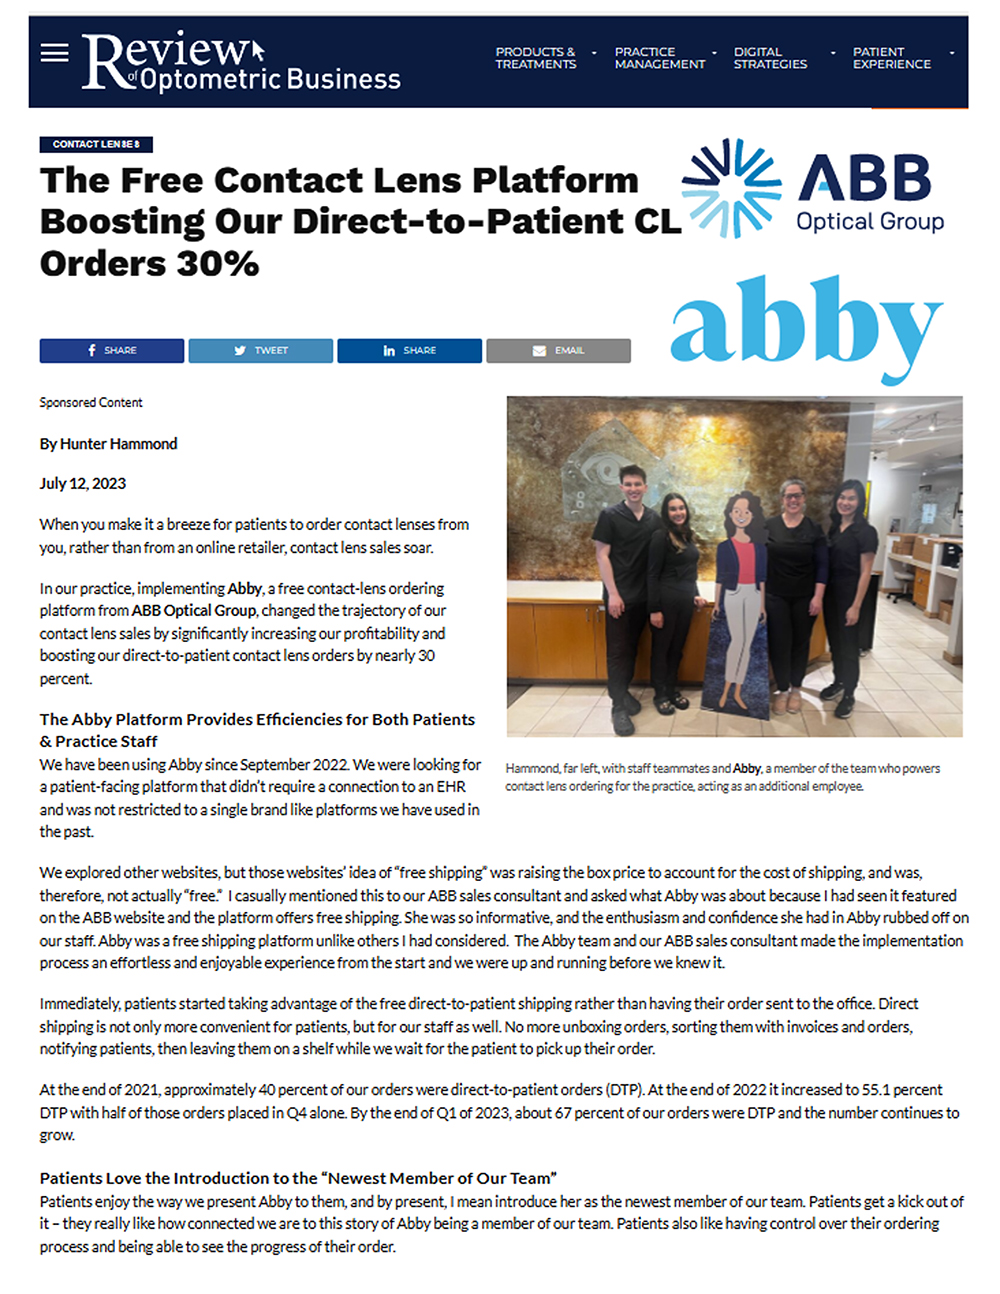 Abby Boosts DTP by 30 Percent - ROB Article 7-12-23 thumbnail